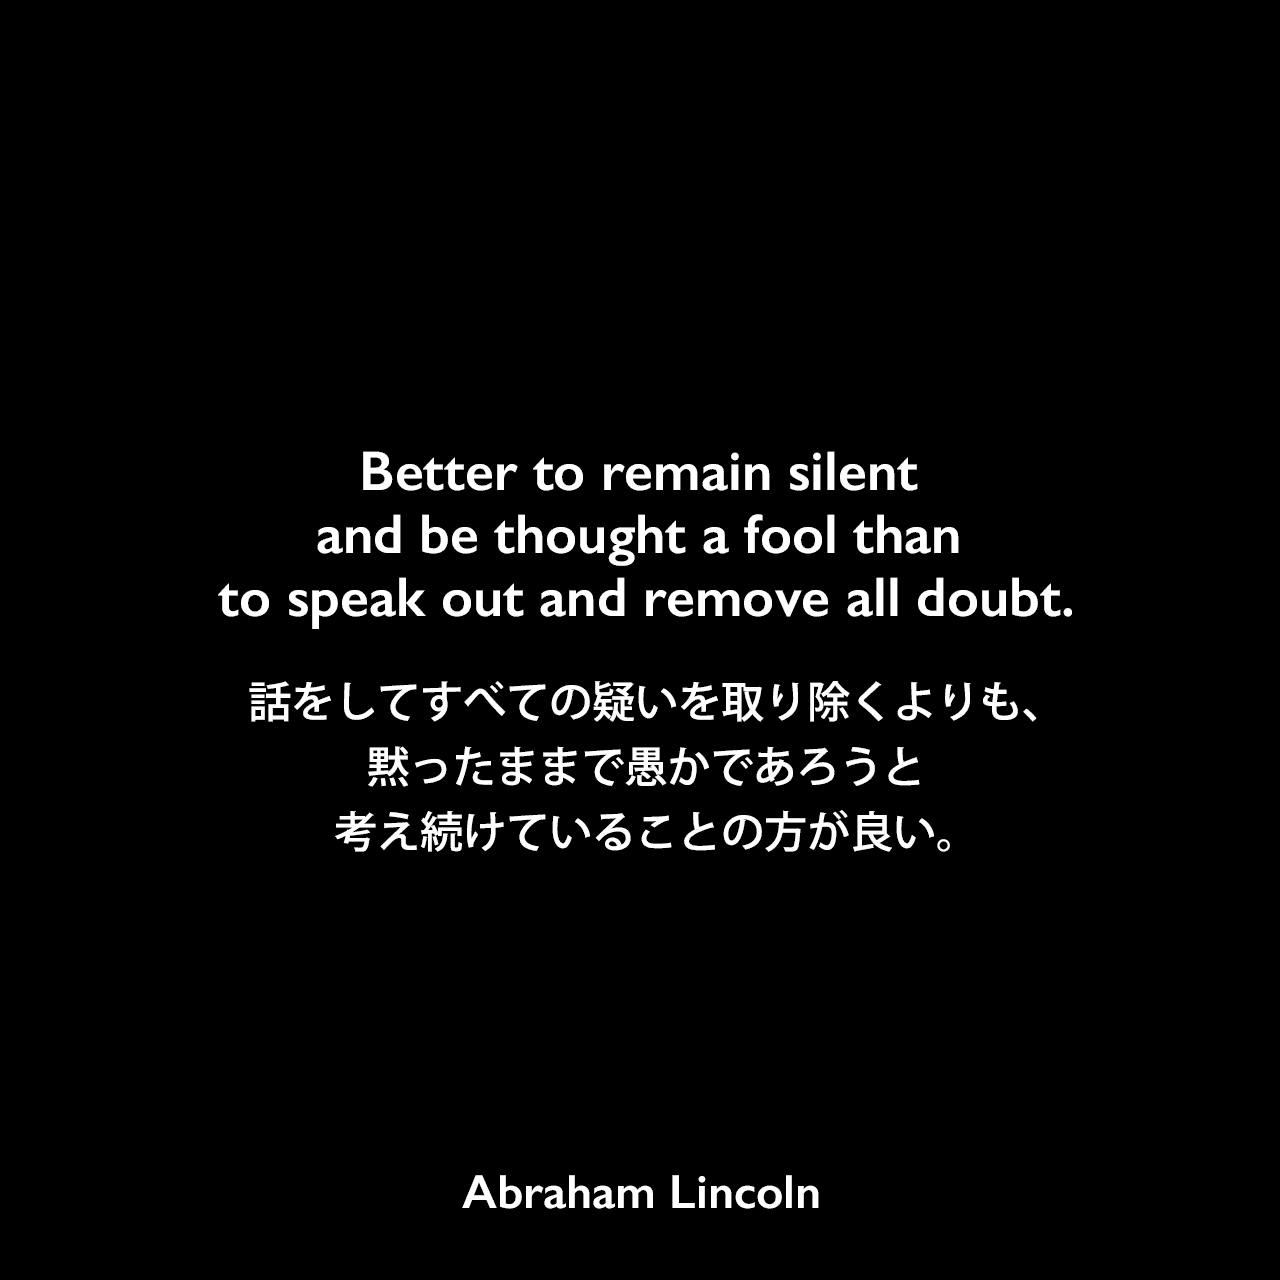 Better to remain silent and be thought a fool than to speak out and remove all doubt.話をしてすべての疑いを取り除くよりも、黙ったままで愚かであろうと考え続けていることの方が良い。Abraham Lincoln